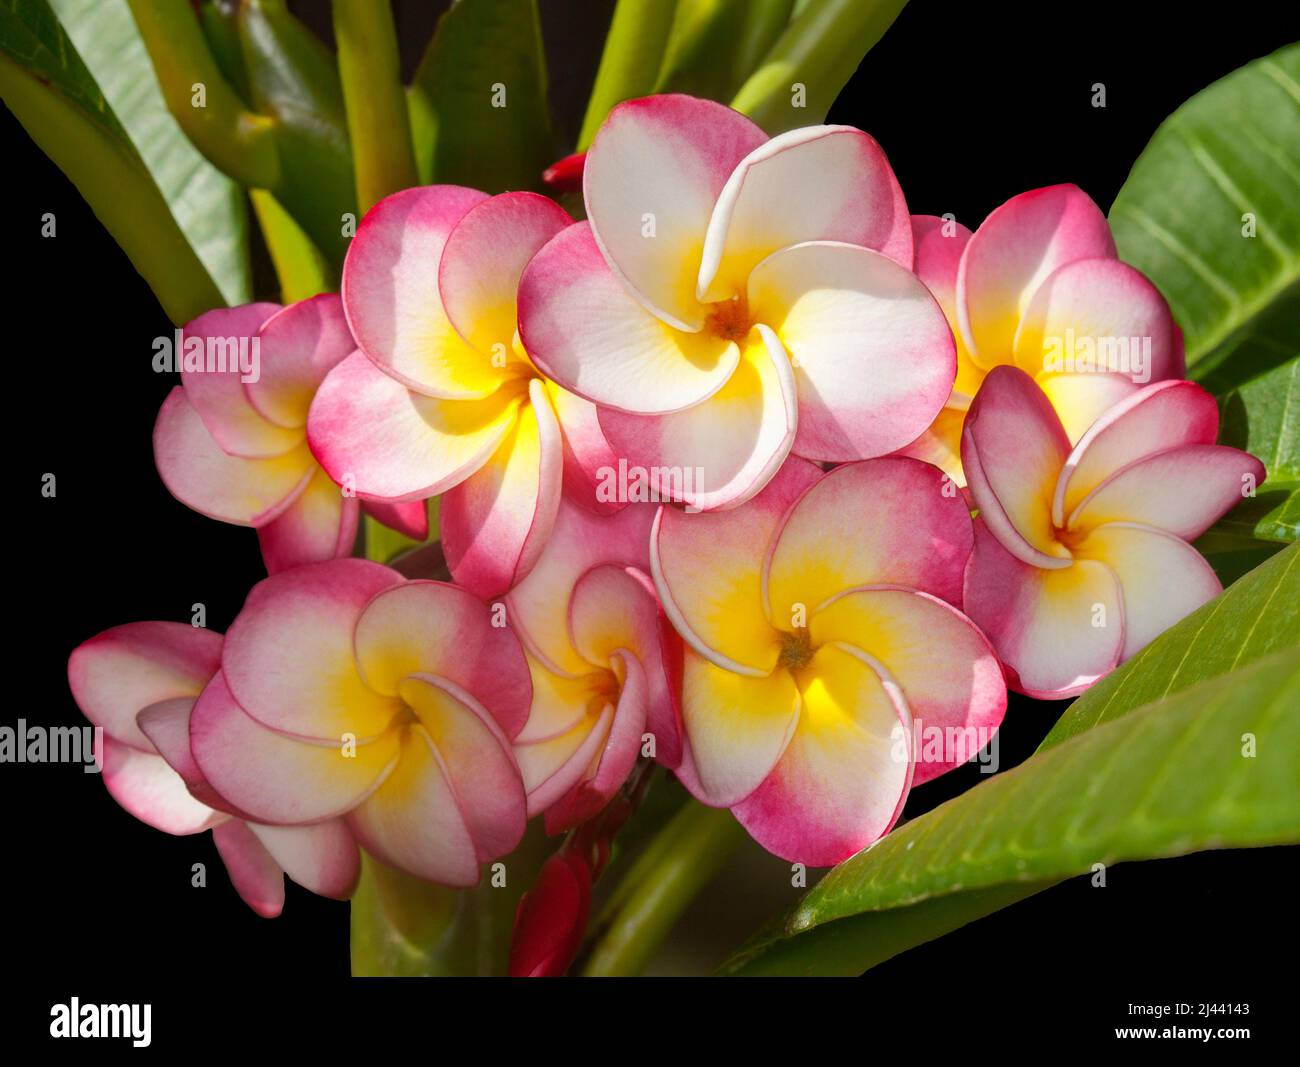 Cluster of spectacular, unusual vivid red, white and yellow perfumed Frangipani flowers, Plumeria rubra 'Danai Delight', on background of green leaves Stock Photo